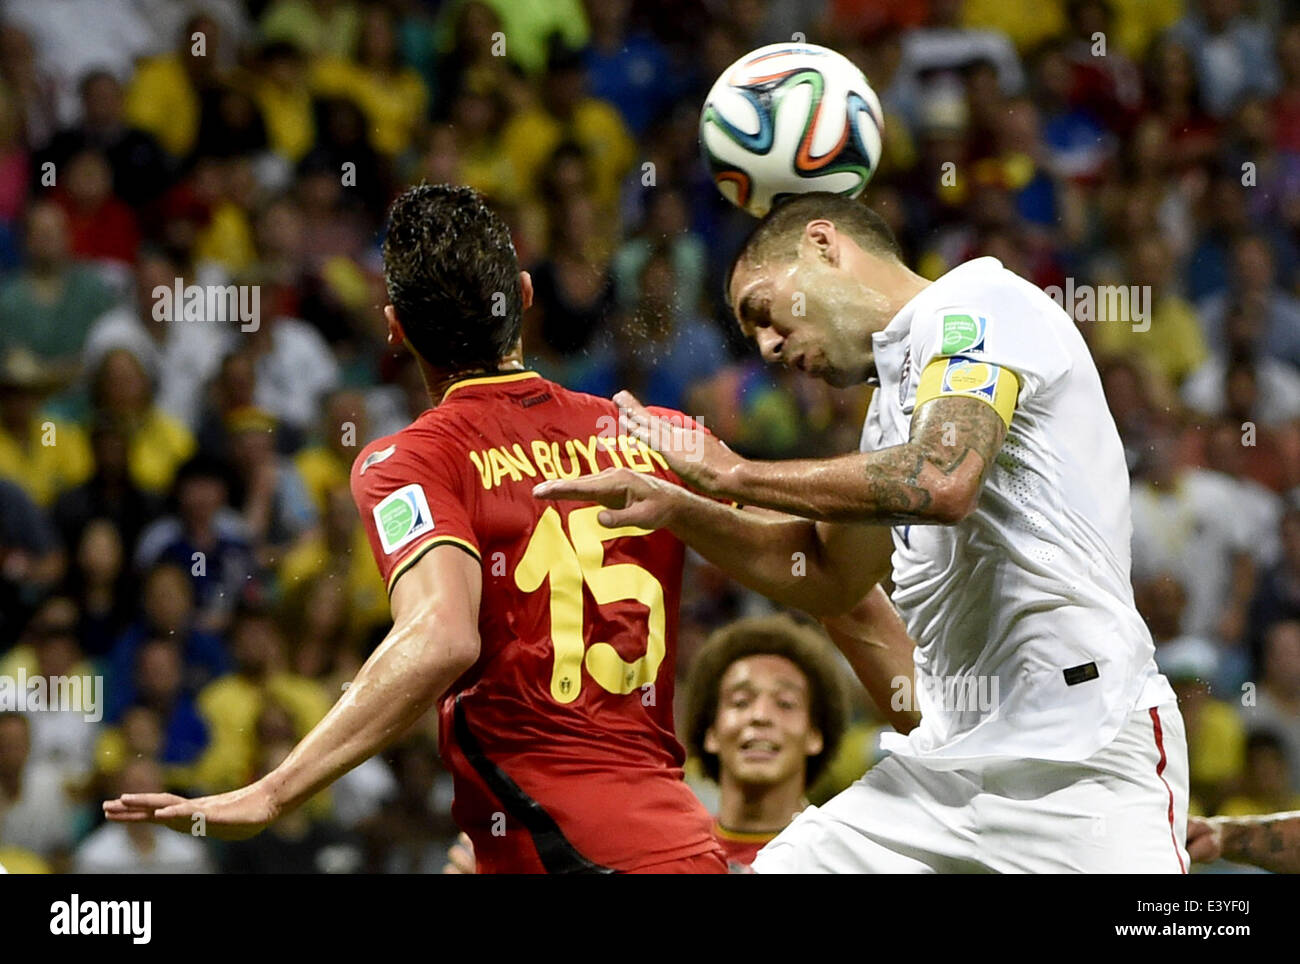 Salvador, Brazil. 1st July, 2014. Clint Dempsey (R) of the U.S. competes for a header with Belgium's Daniel Van Buyten during a Round of 16 match between Belgium and the U.S. of 2014 FIFA World Cup at the Arena Fonte Nova Stadium in Salvador, Brazil, on July 1, 2014. Credit:  Lui Siu Wai/Xinhua/Alamy Live News Stock Photo